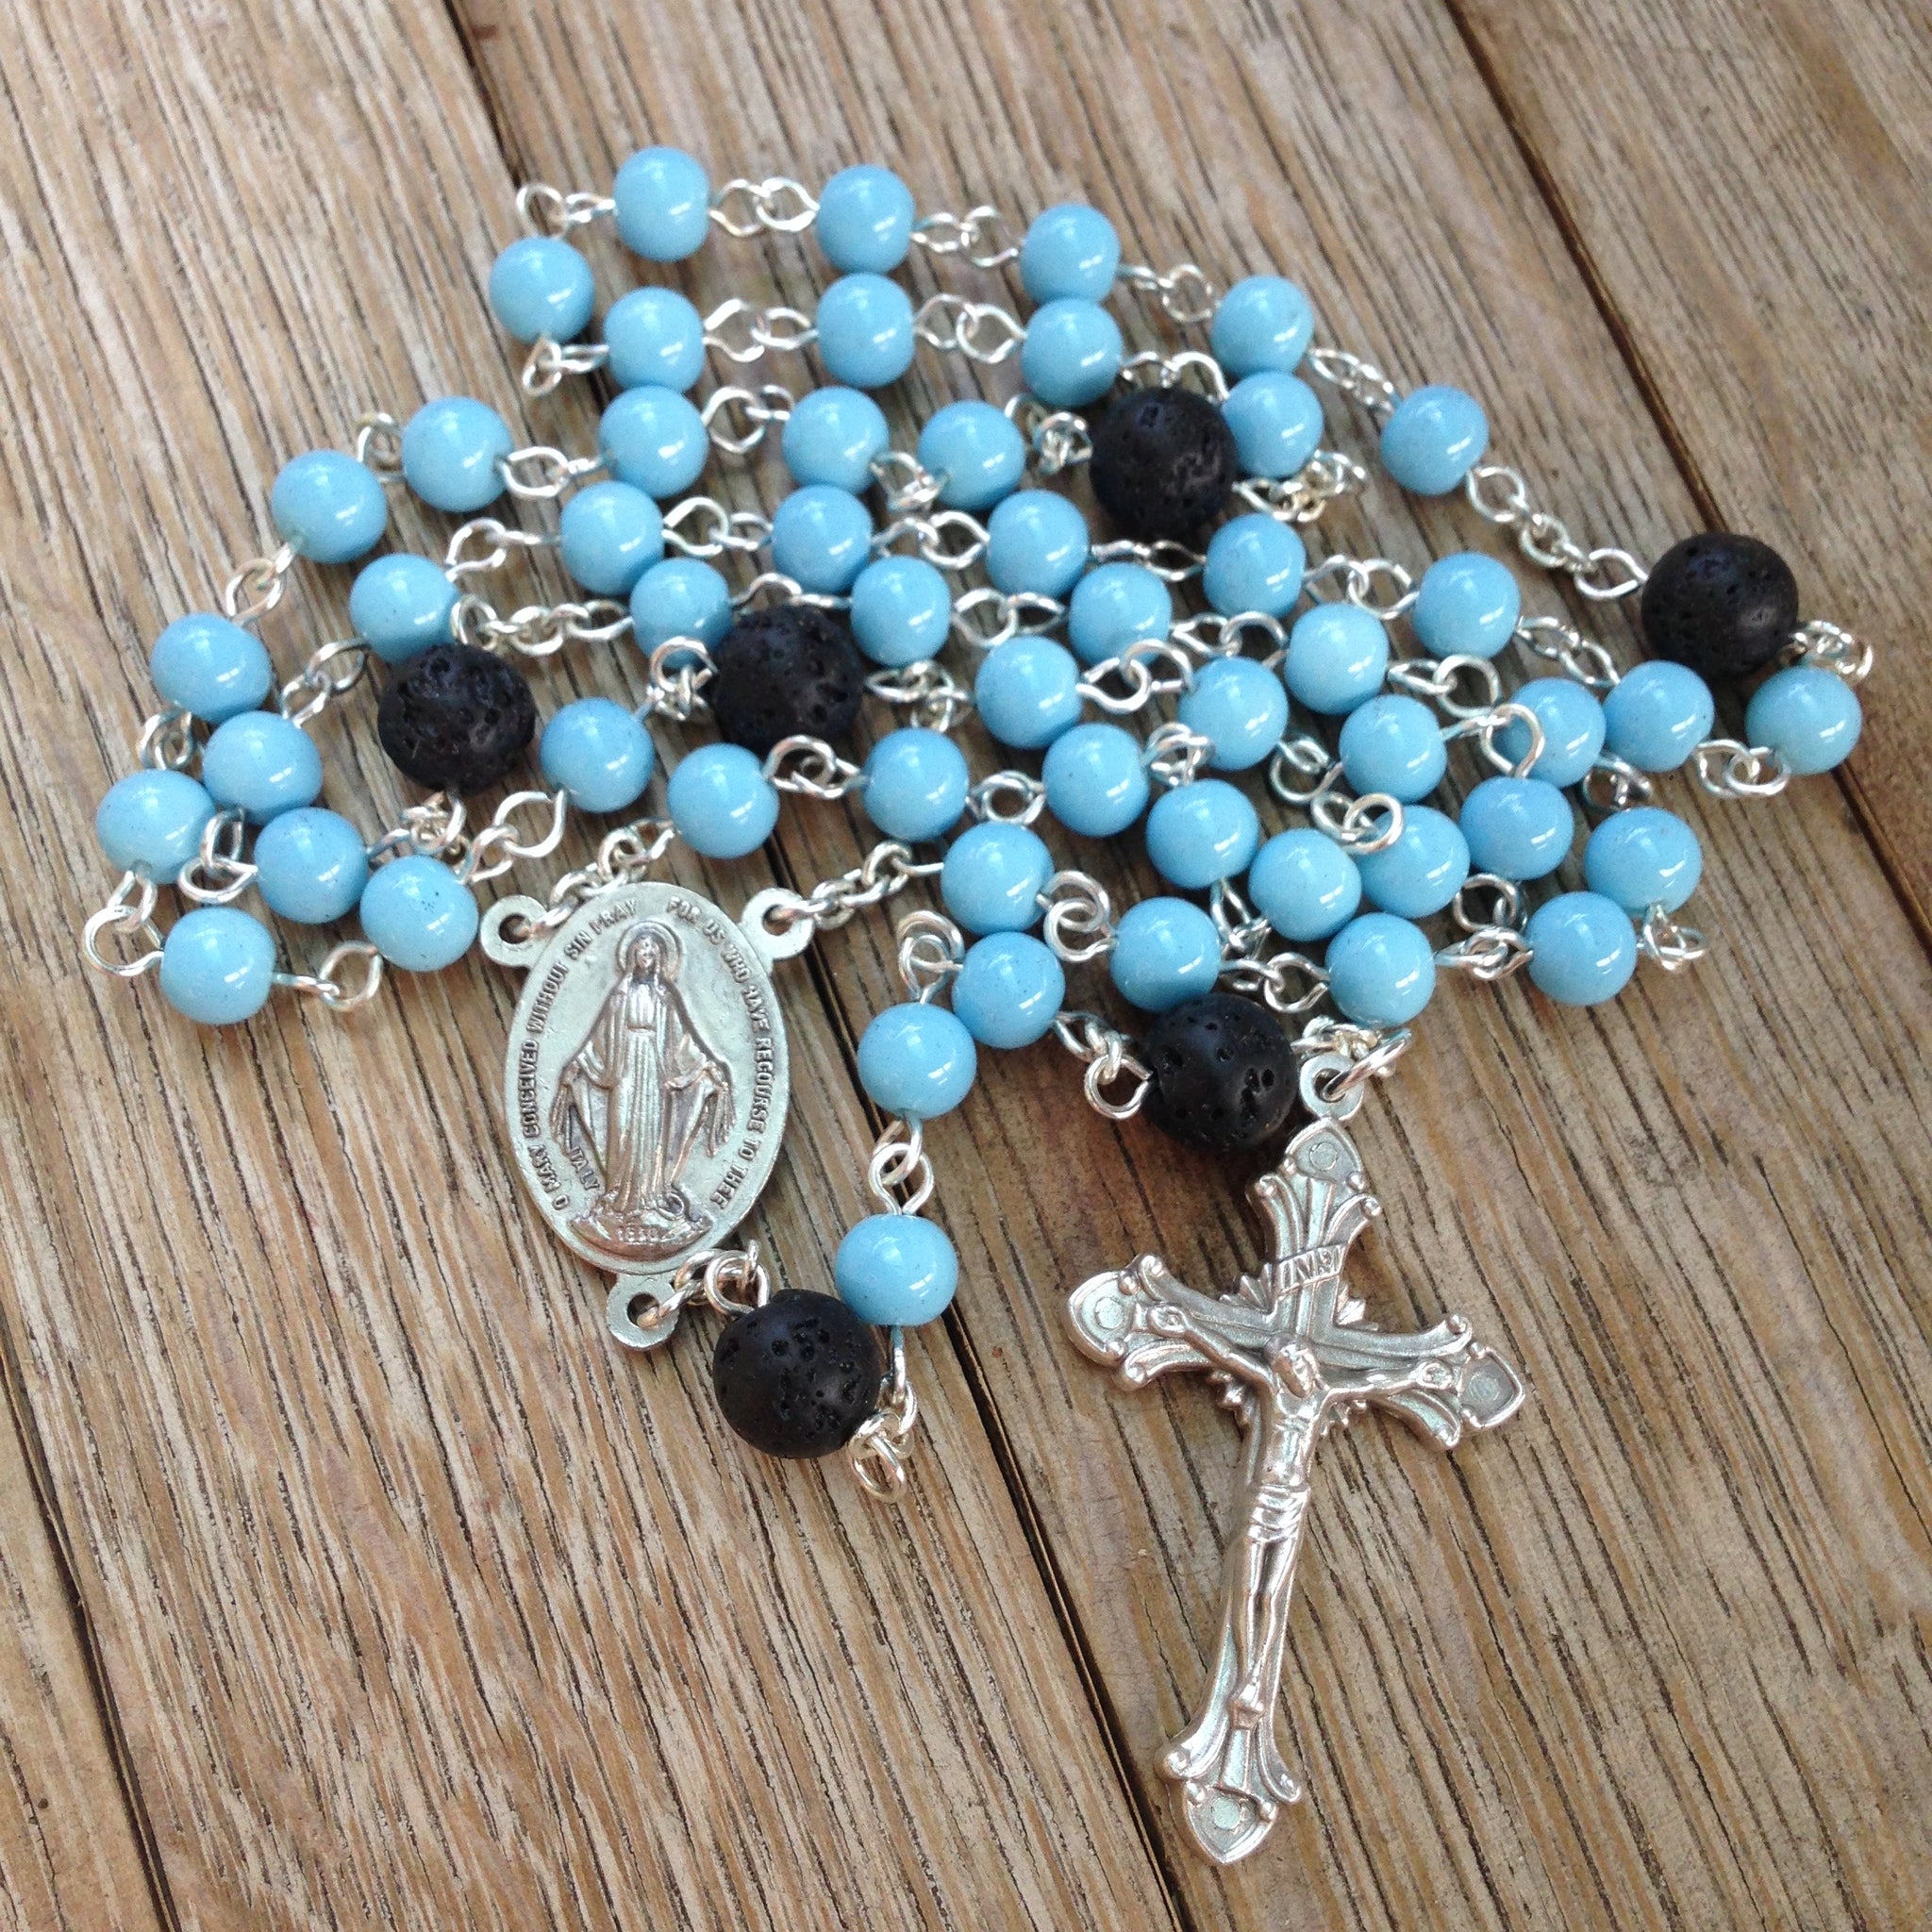 Aromatherapy rosary with blue glass beads